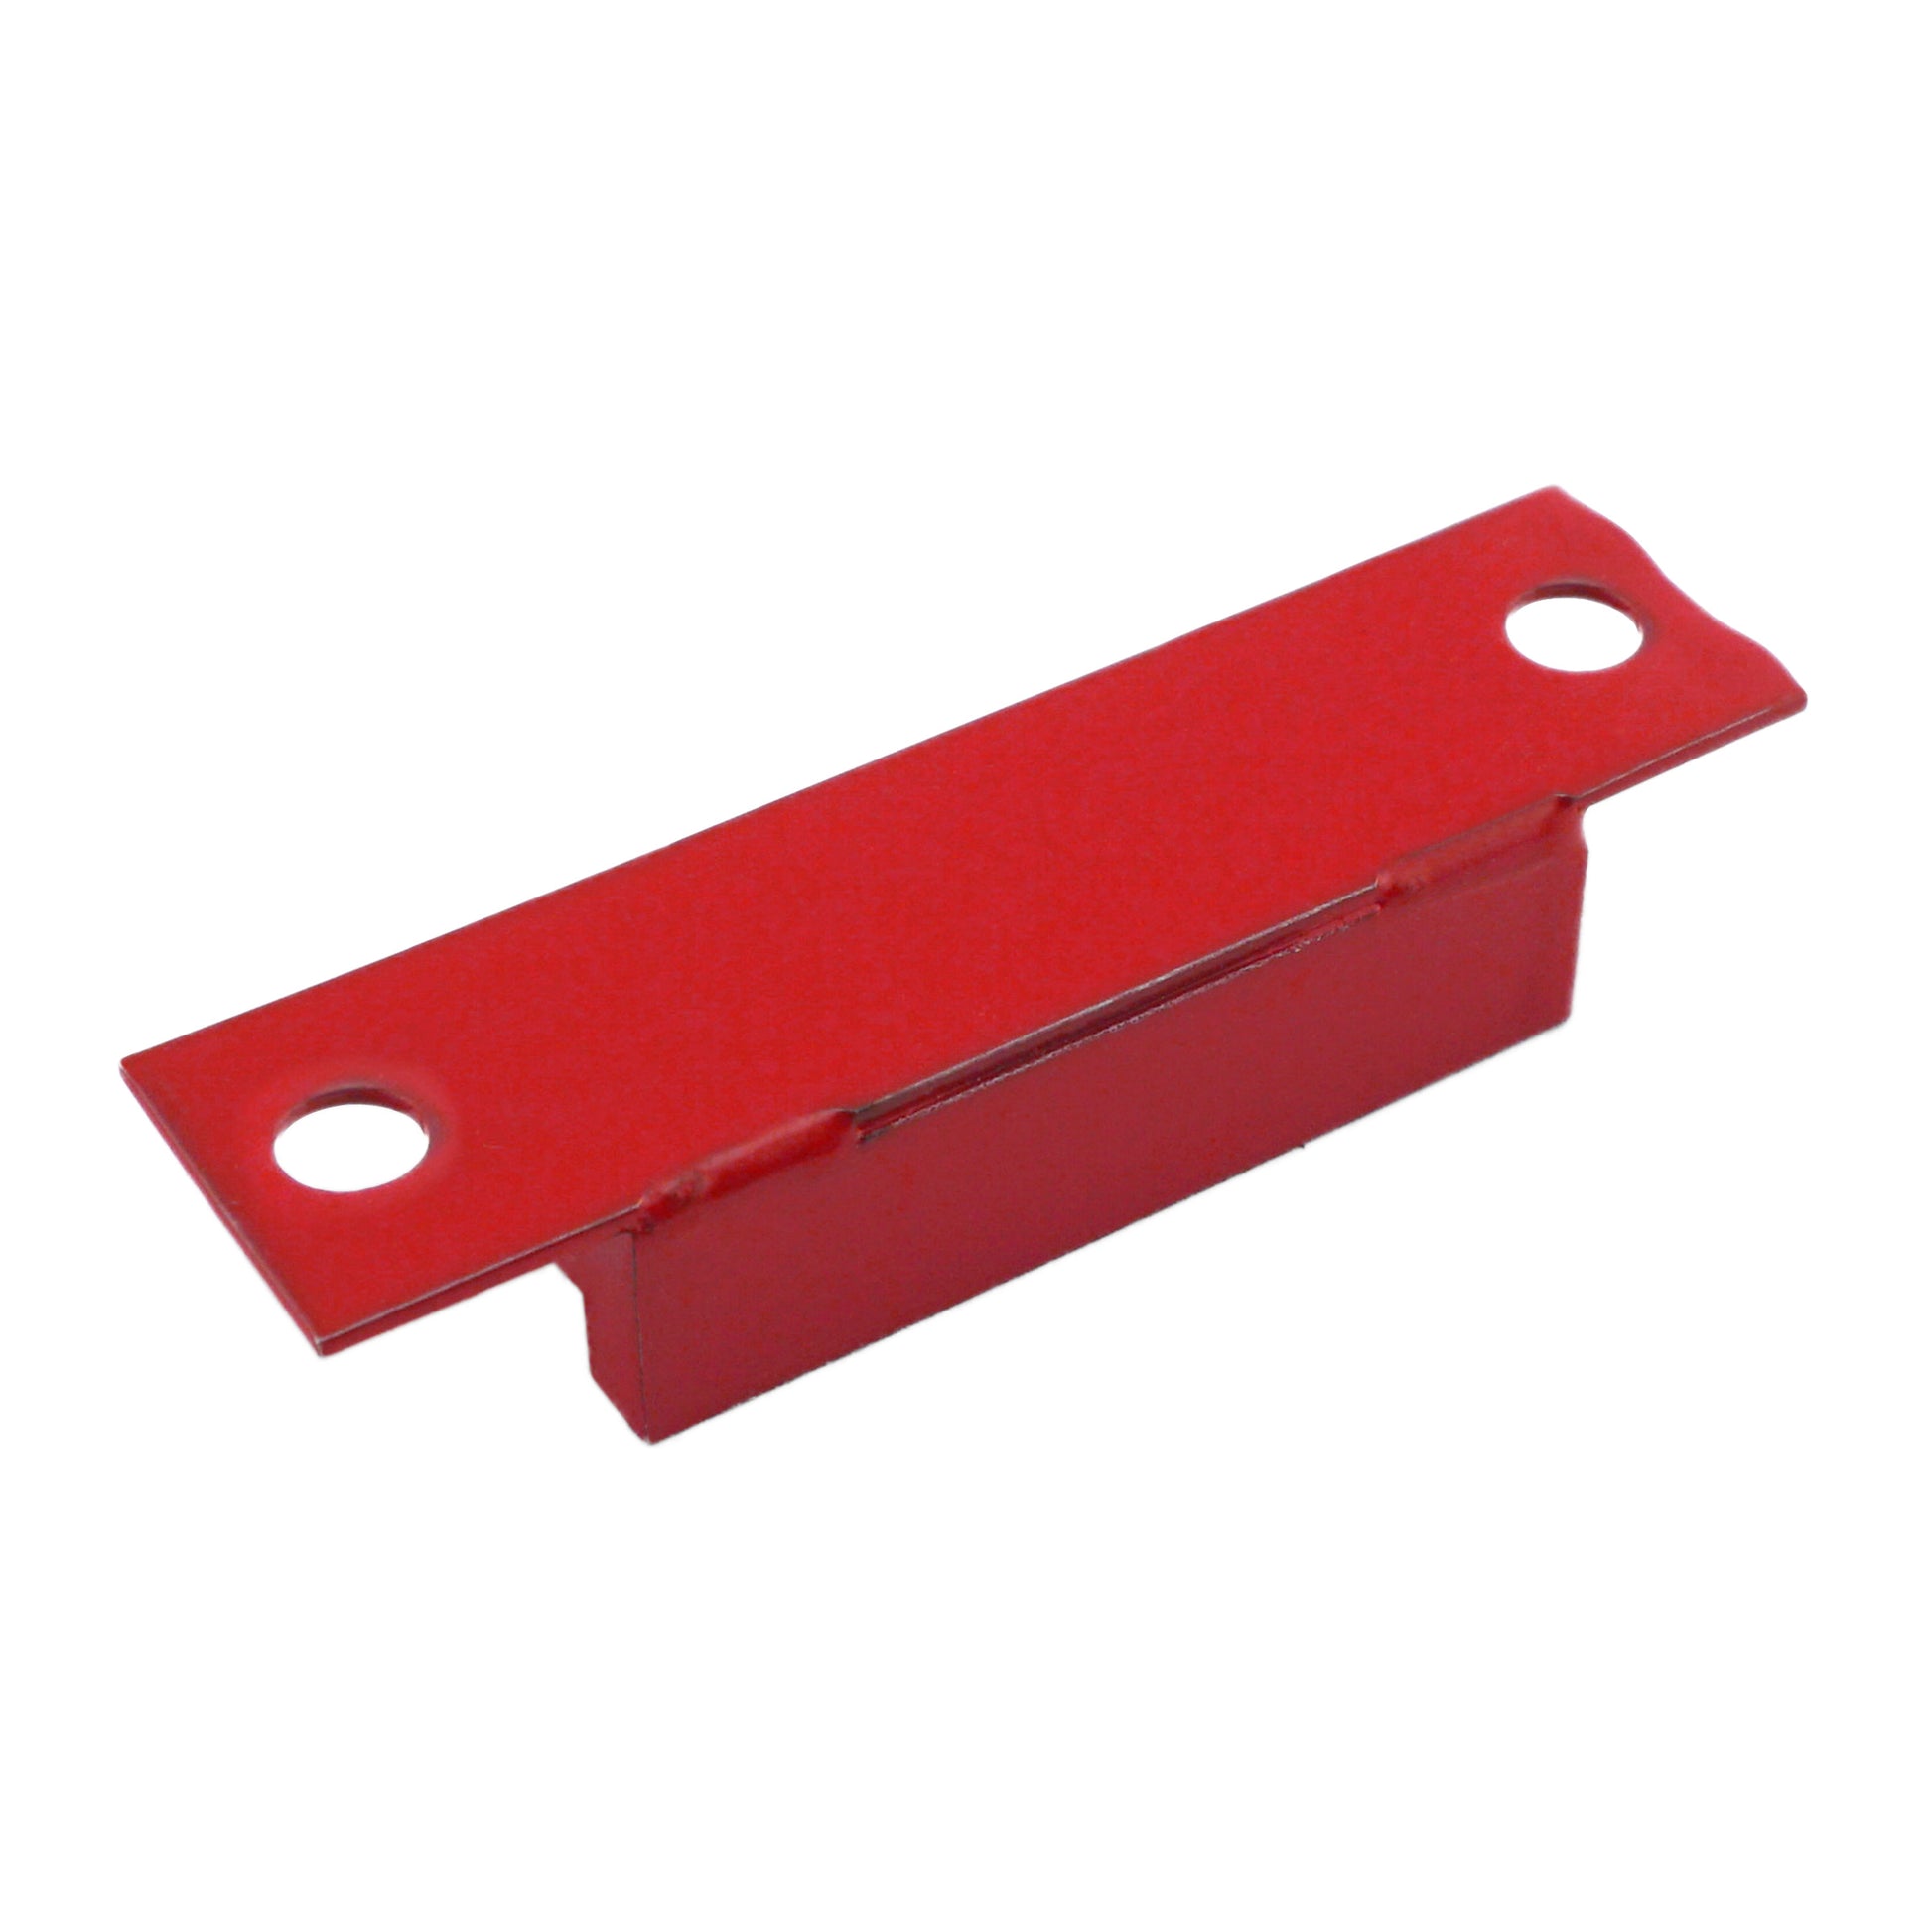 Load image into Gallery viewer, LM-20B Ceramic Latch Magnet - 45 Degree Angle View